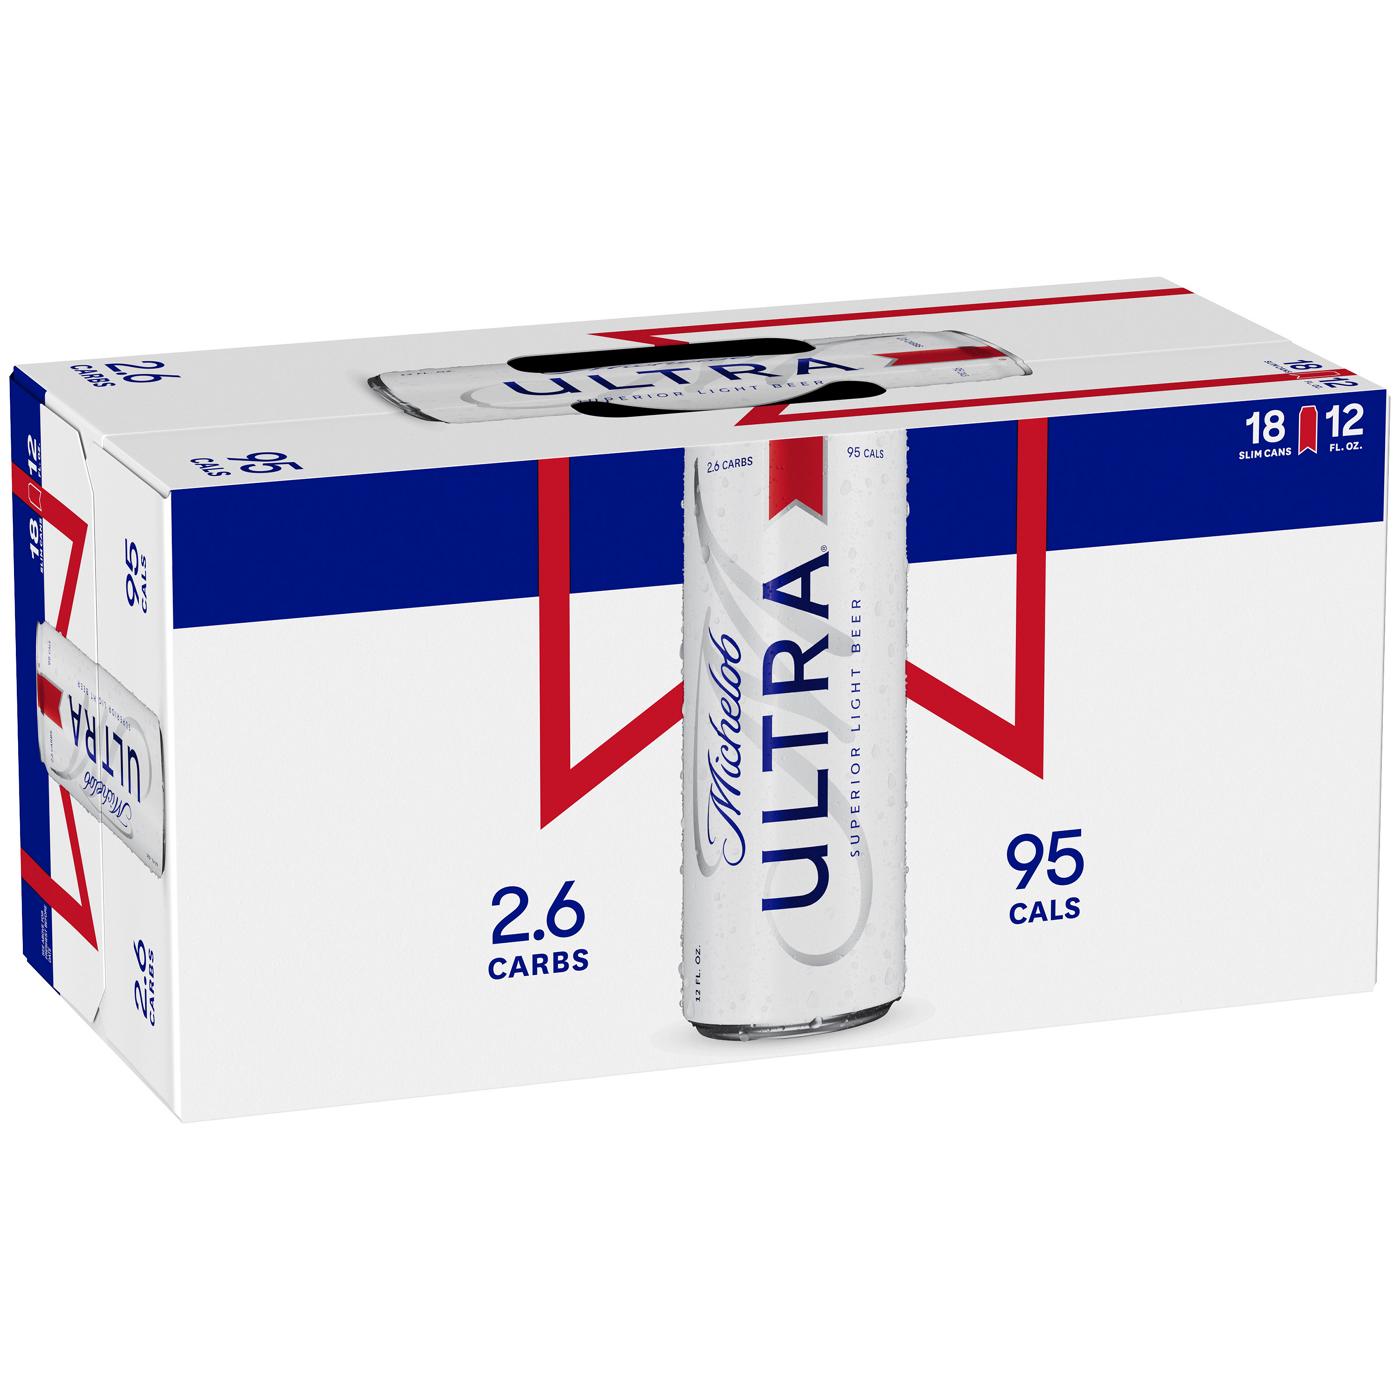 Michelob Ultra Beer 18 pk Slim Cans; image 1 of 2